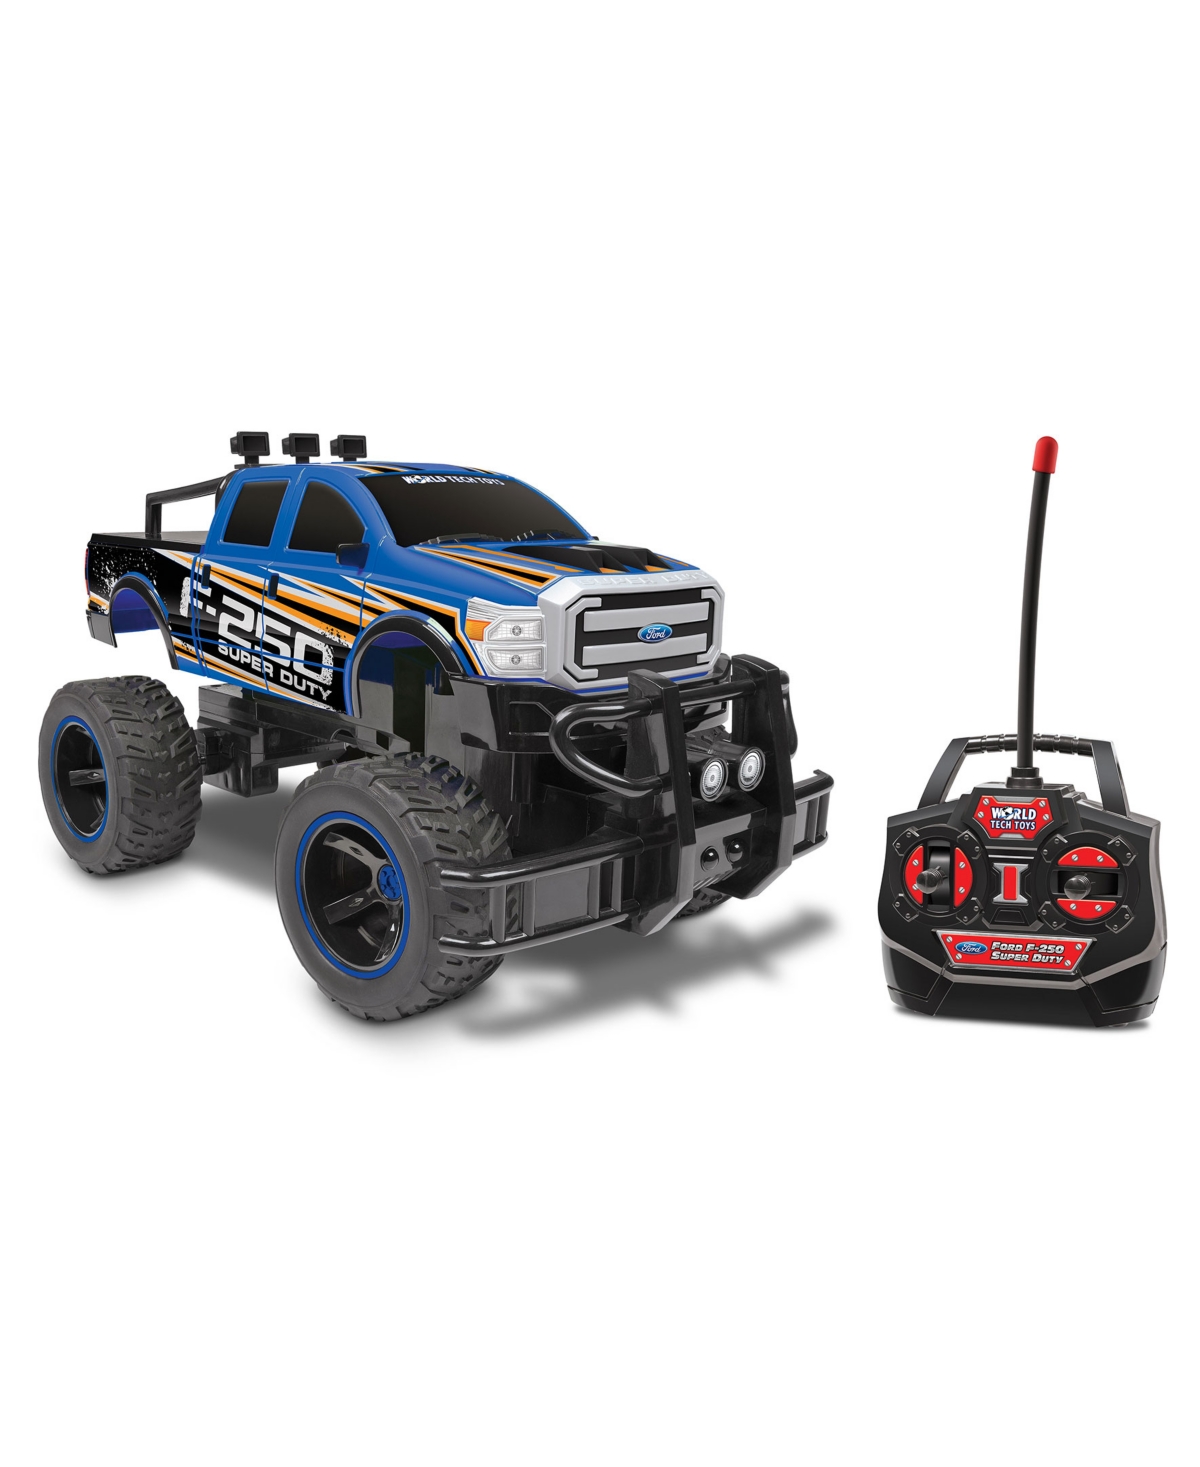 Ford F-250 Super Duty 1:14 Electric Rc Car Monster Truck, Color Varies In Red,green Or Blue